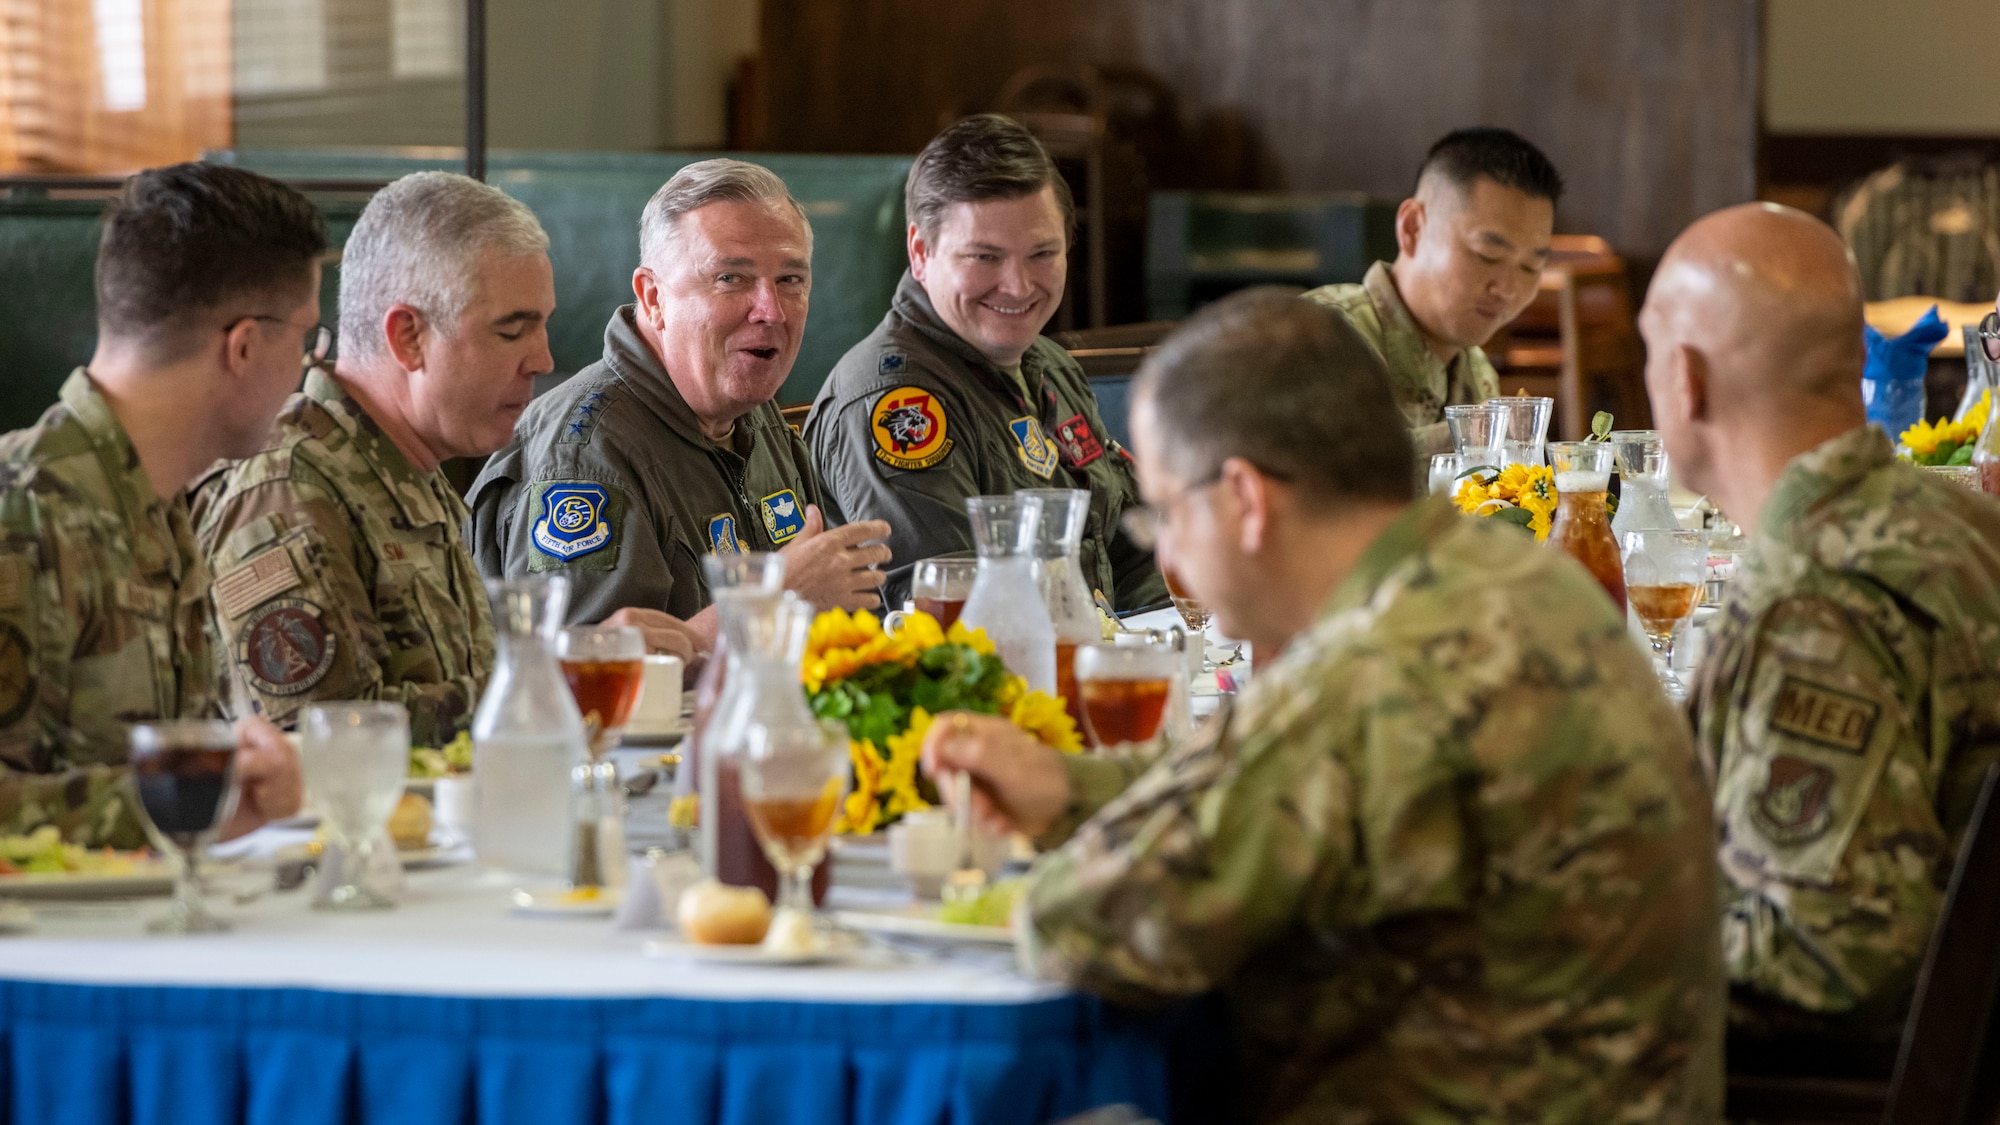 Military members conversating during lunch with one another.